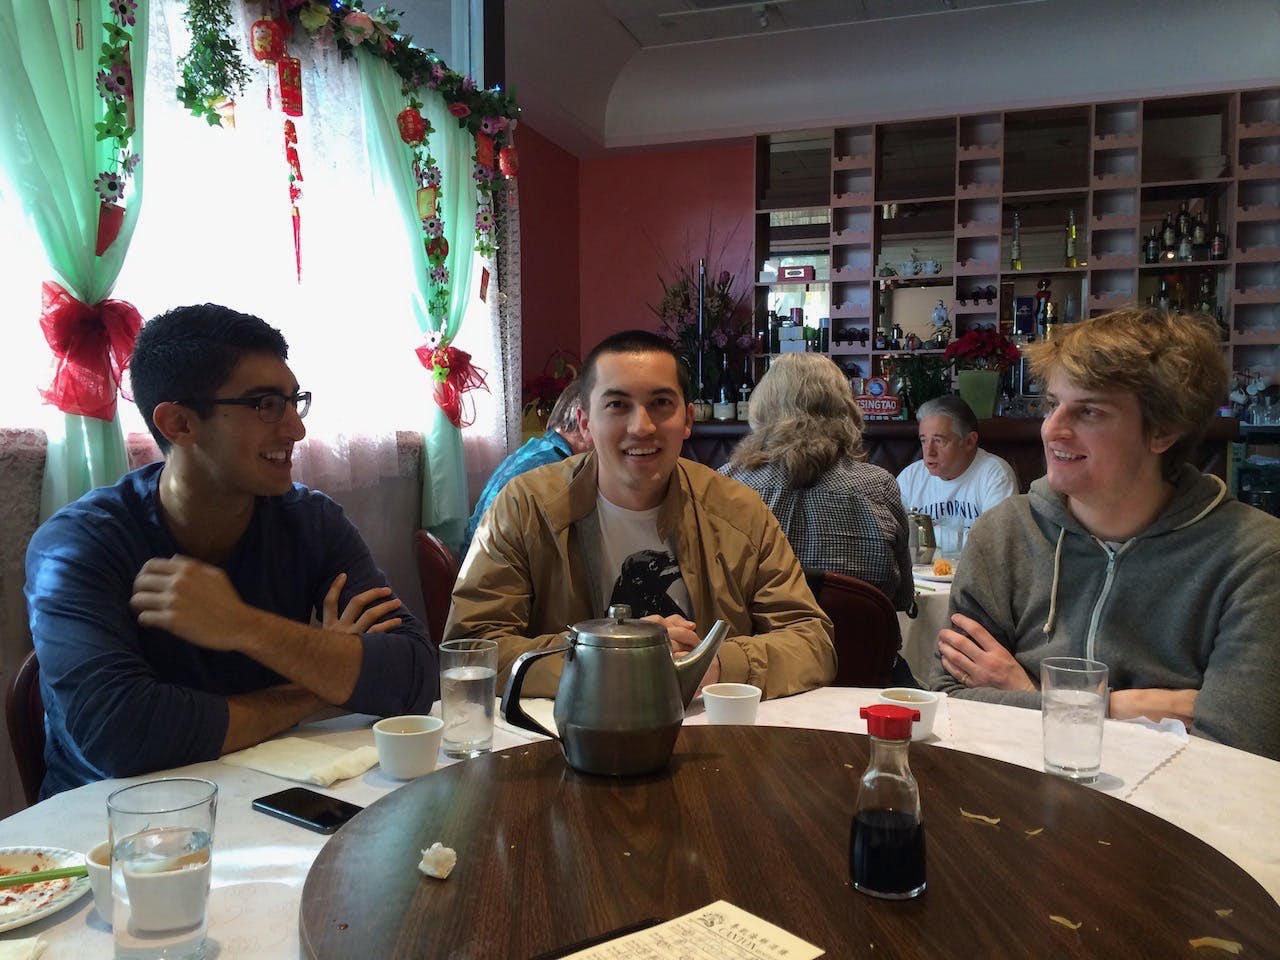 Armon Dadgar, Mitchell Hashimoto, and Jack Pearkes at a restaurant table